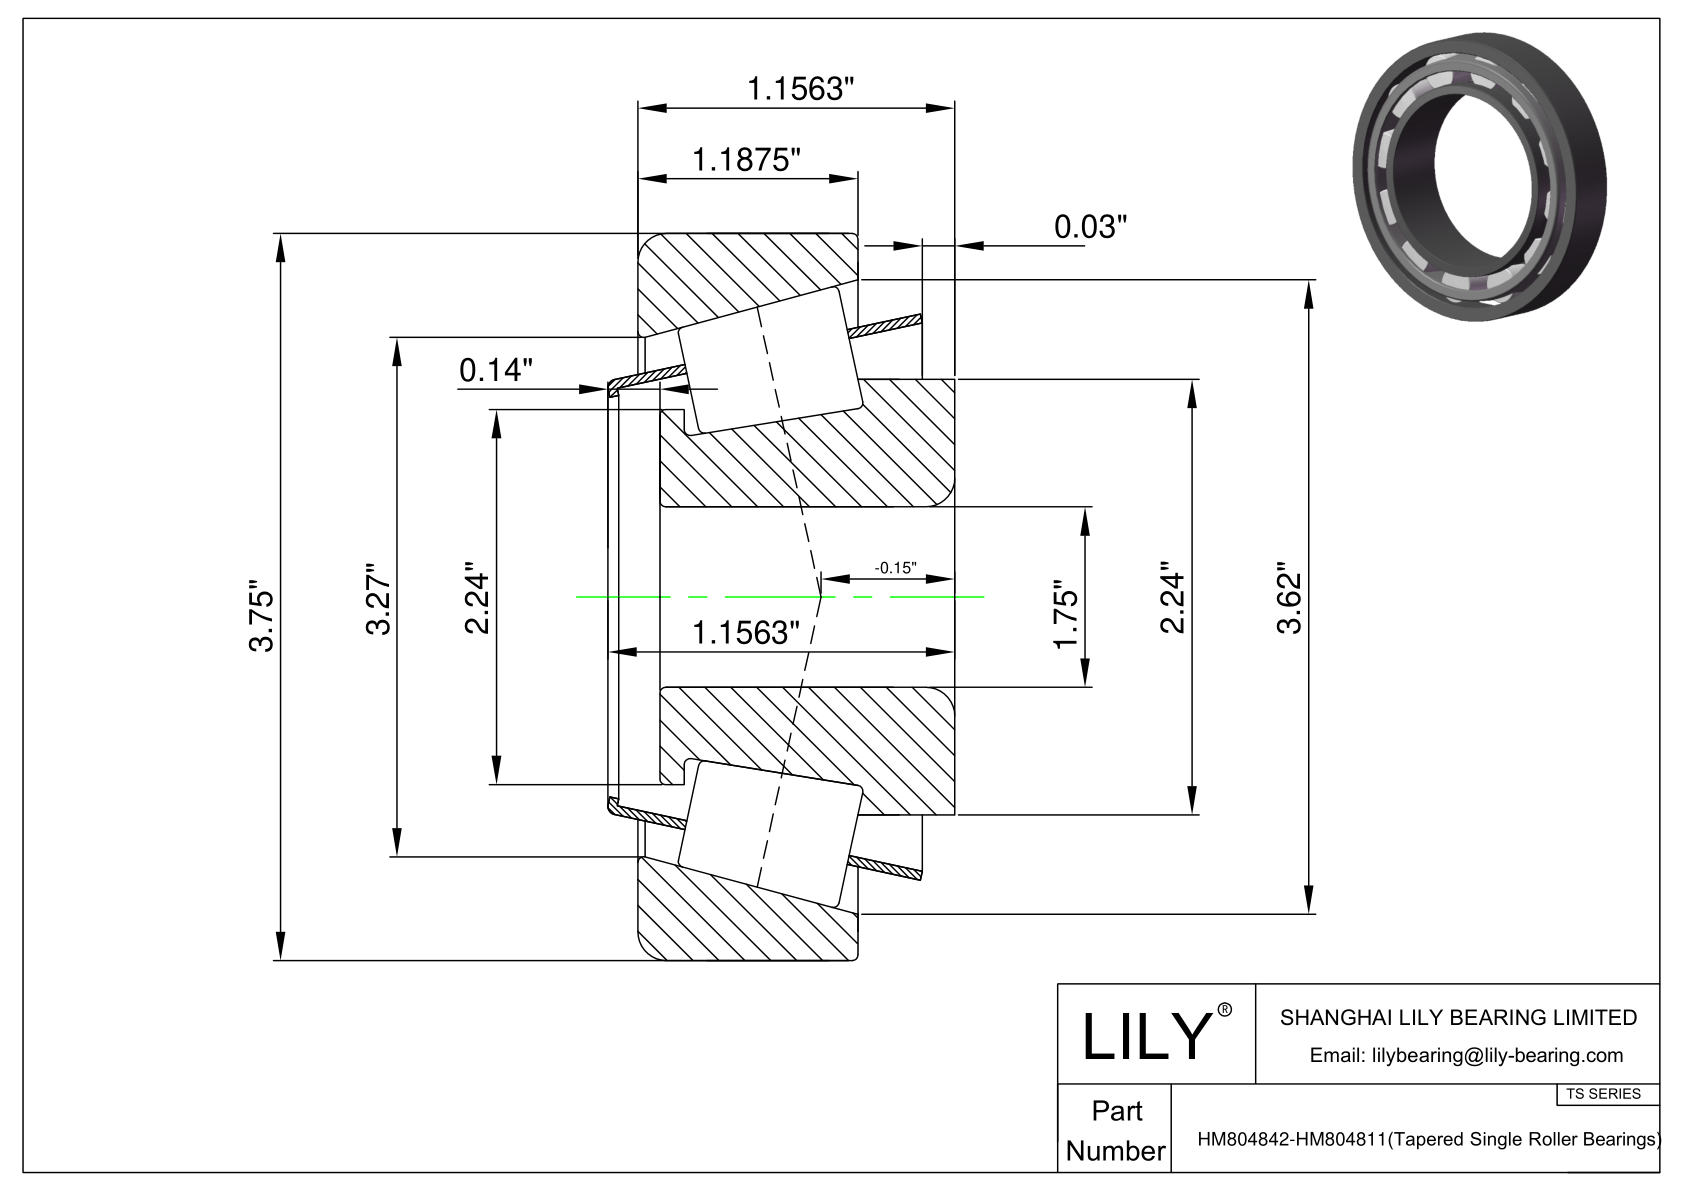 HM804842-HM804811 TS (Tapered Single Roller Bearings) (Imperial) cad drawing